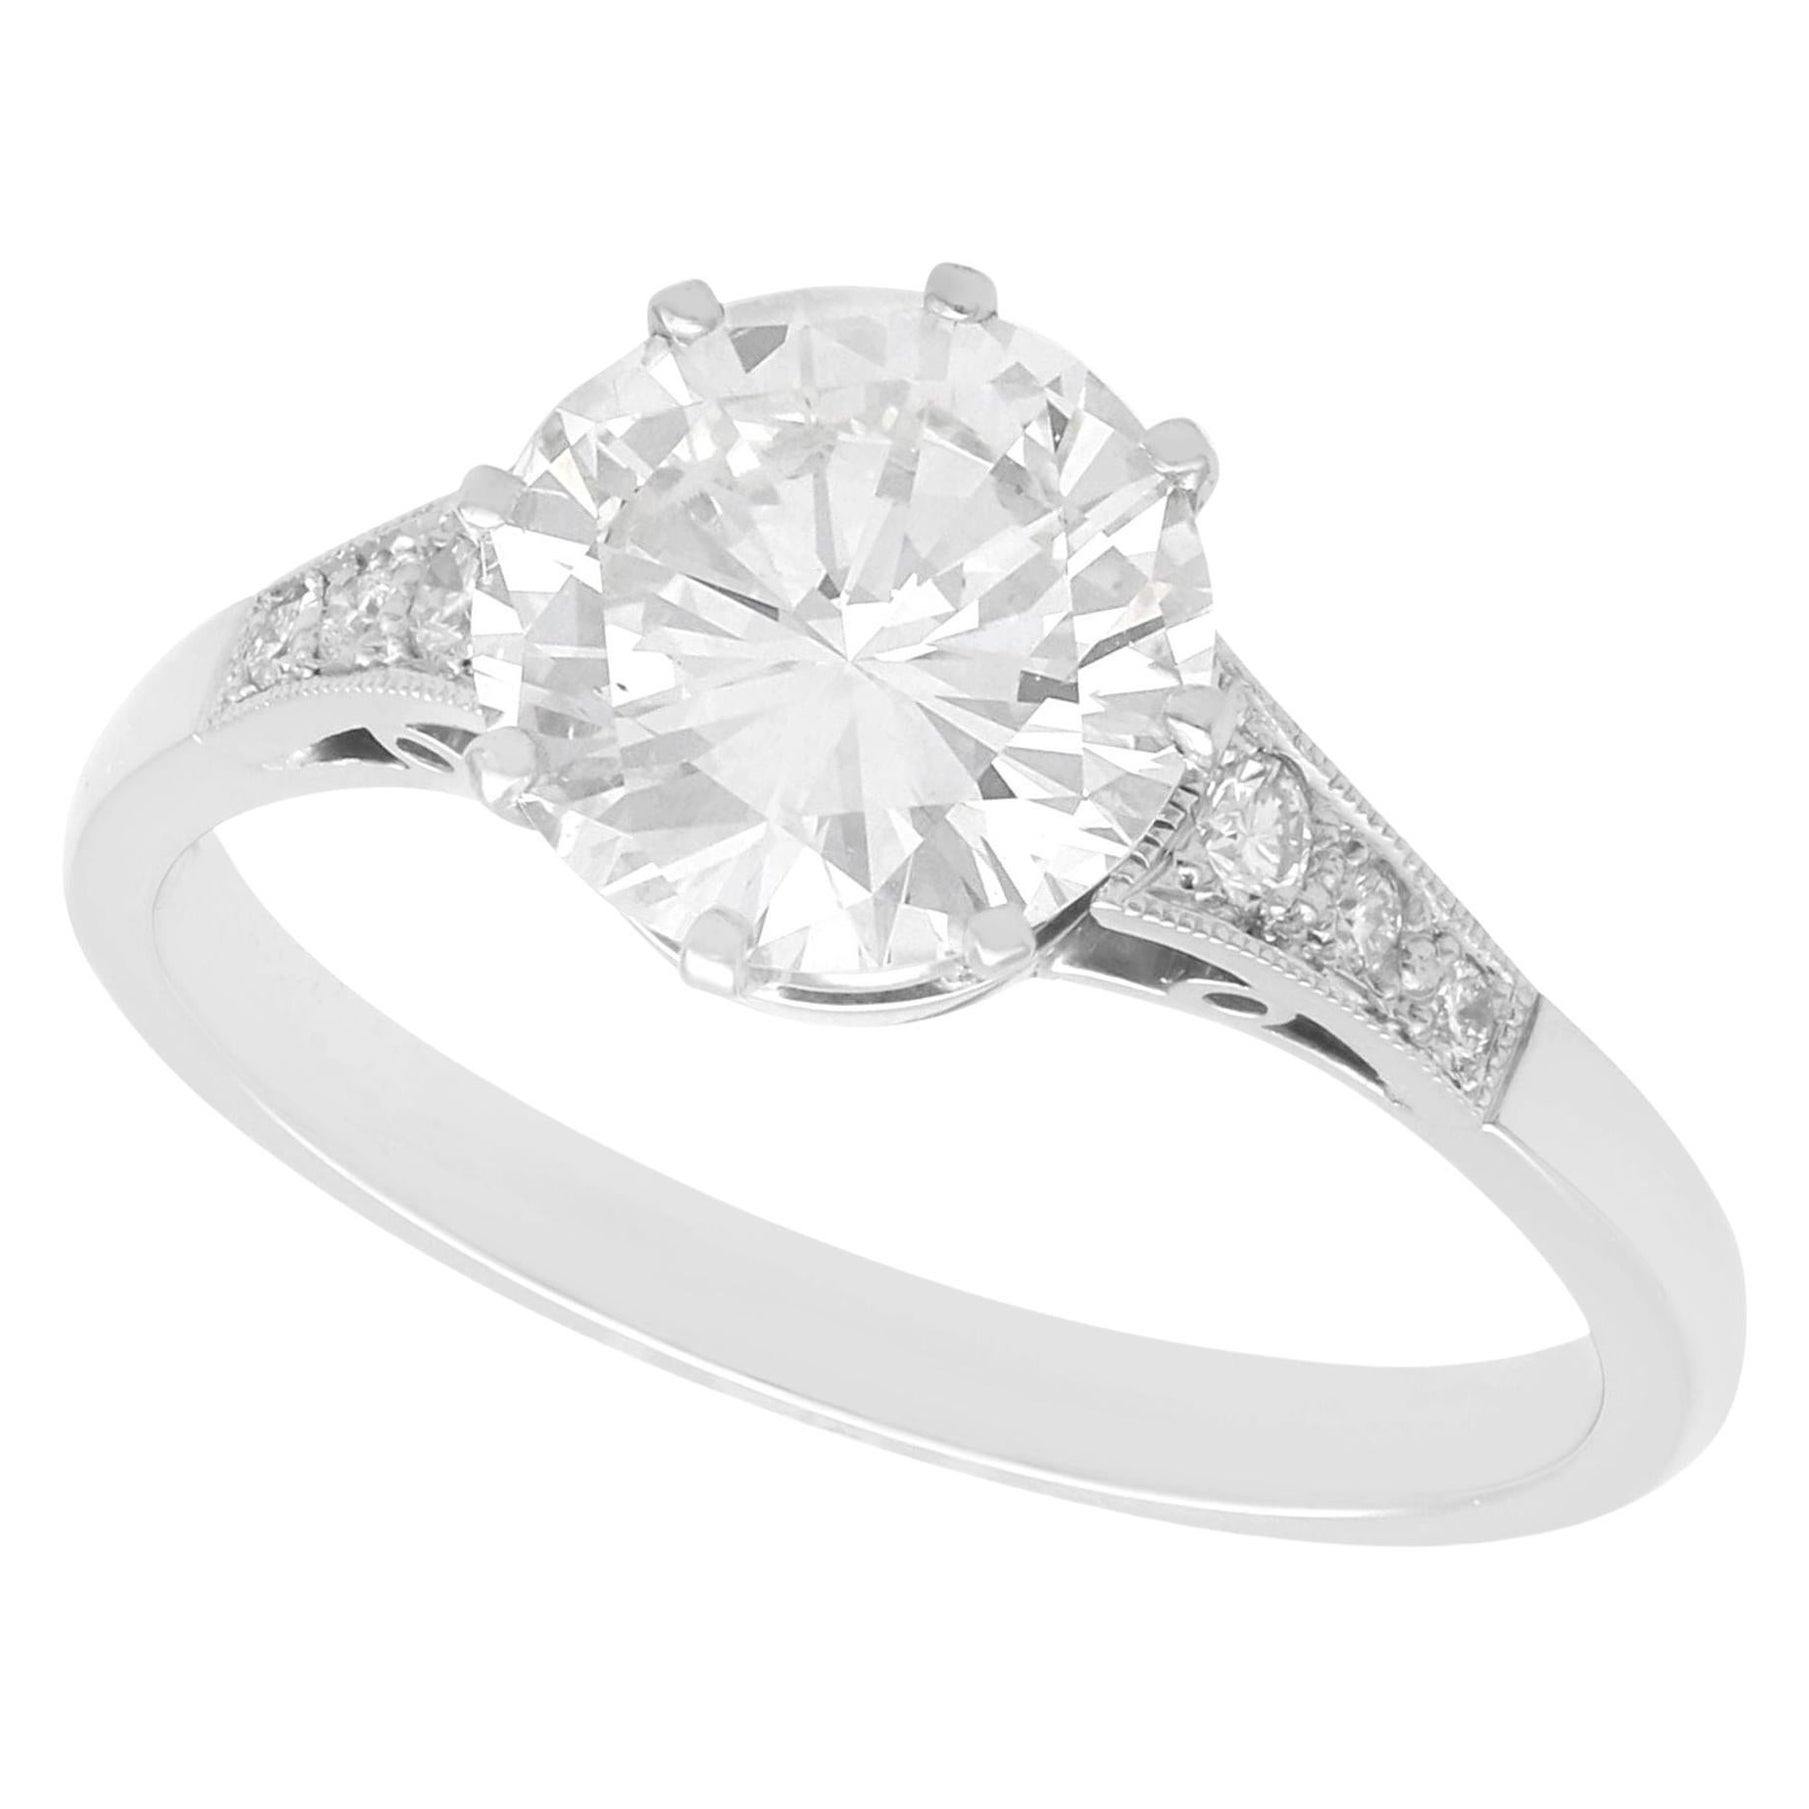 2.04 Carat Diamond and Platinum Solitaire Ring For Sale